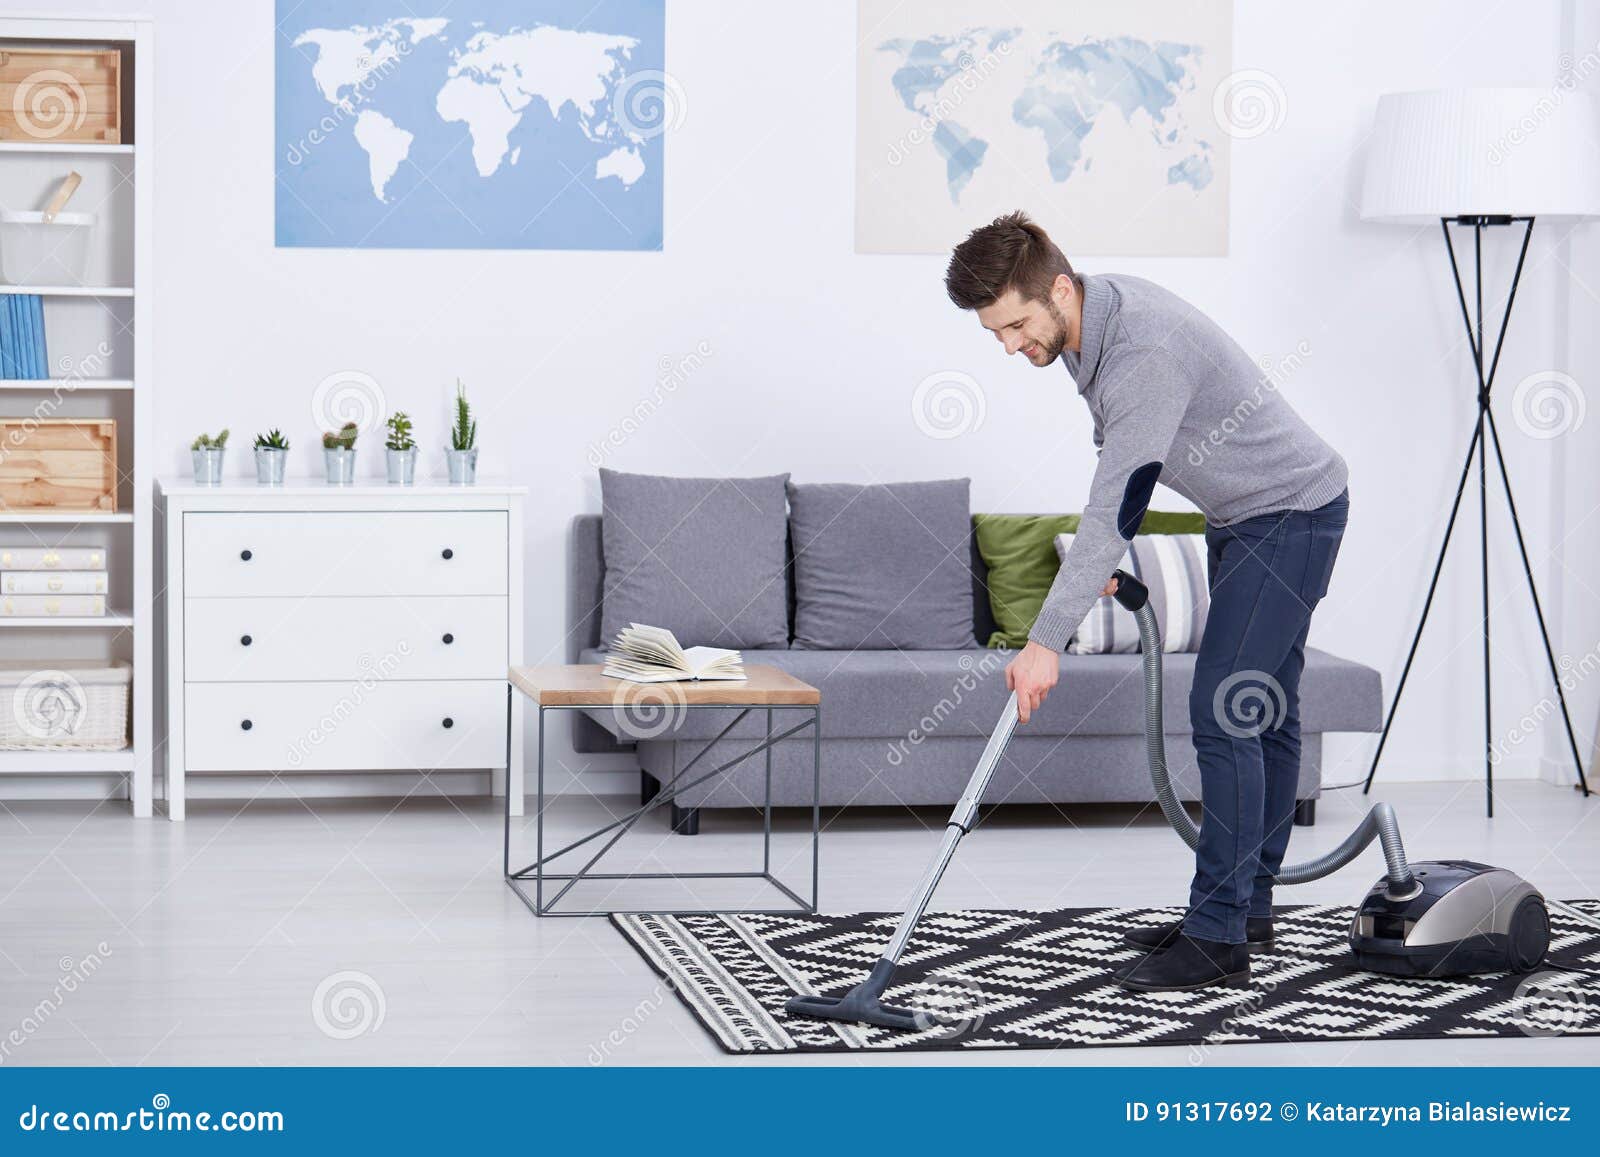 man vacuuming in a living room